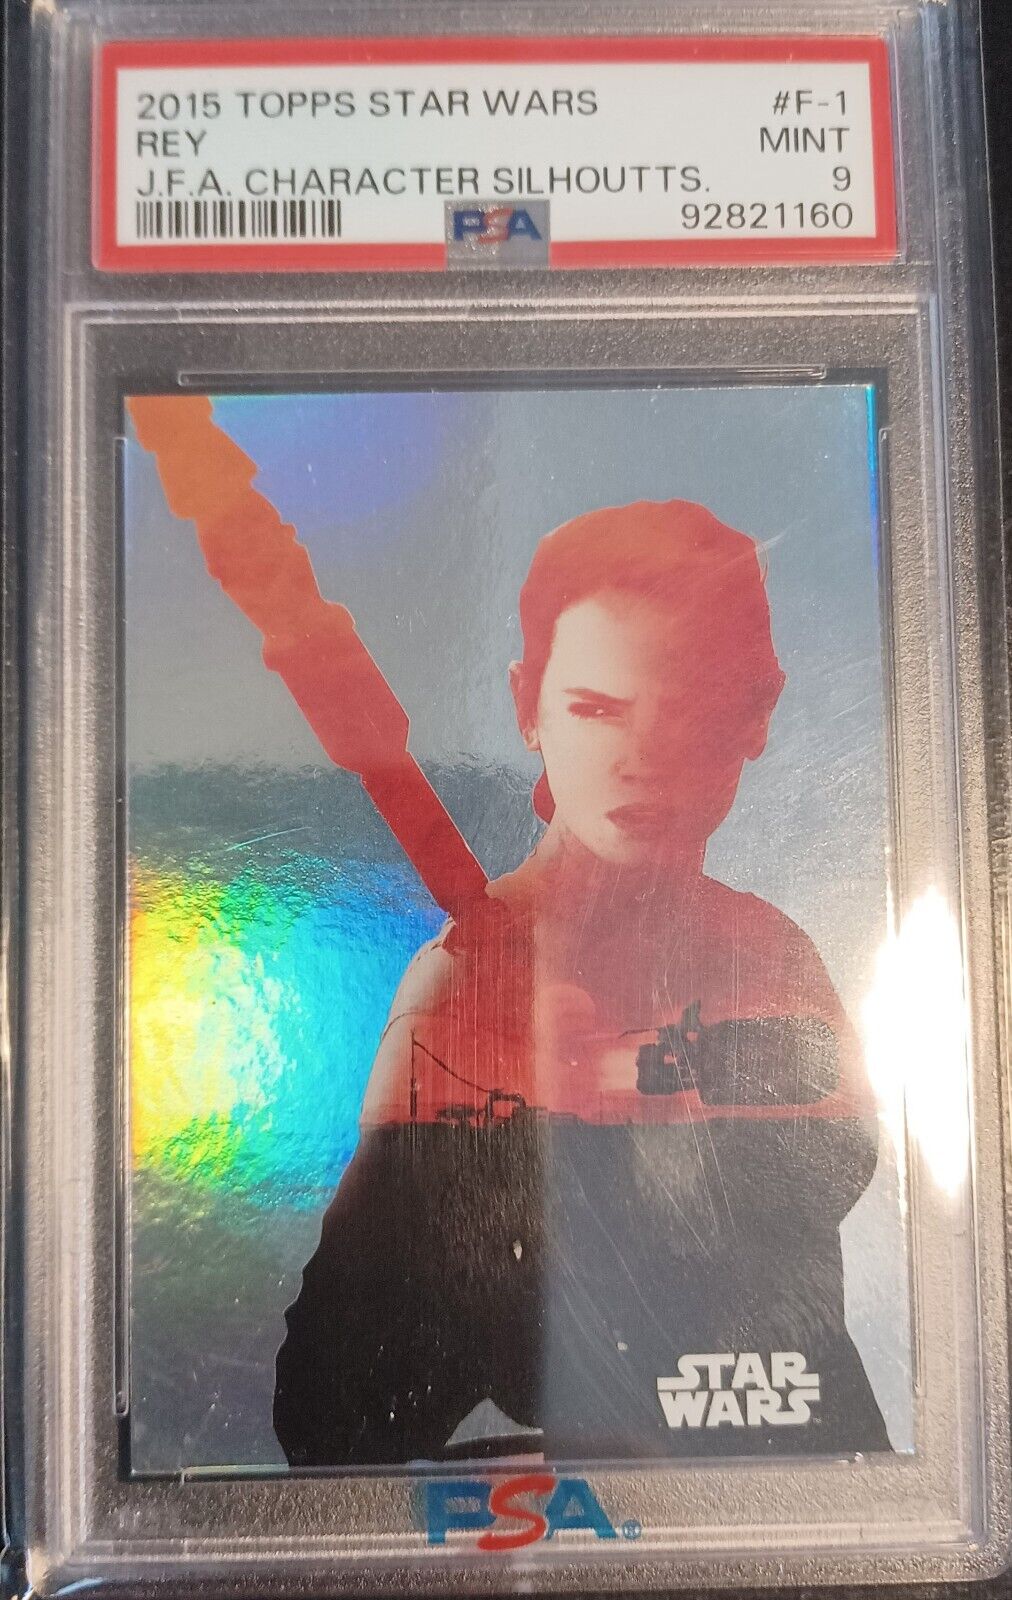 2015 TOPPS STAR WARS J.F.A. #F-1 REY RC HOLOFOIL CHARACTER SILHOUETTE 